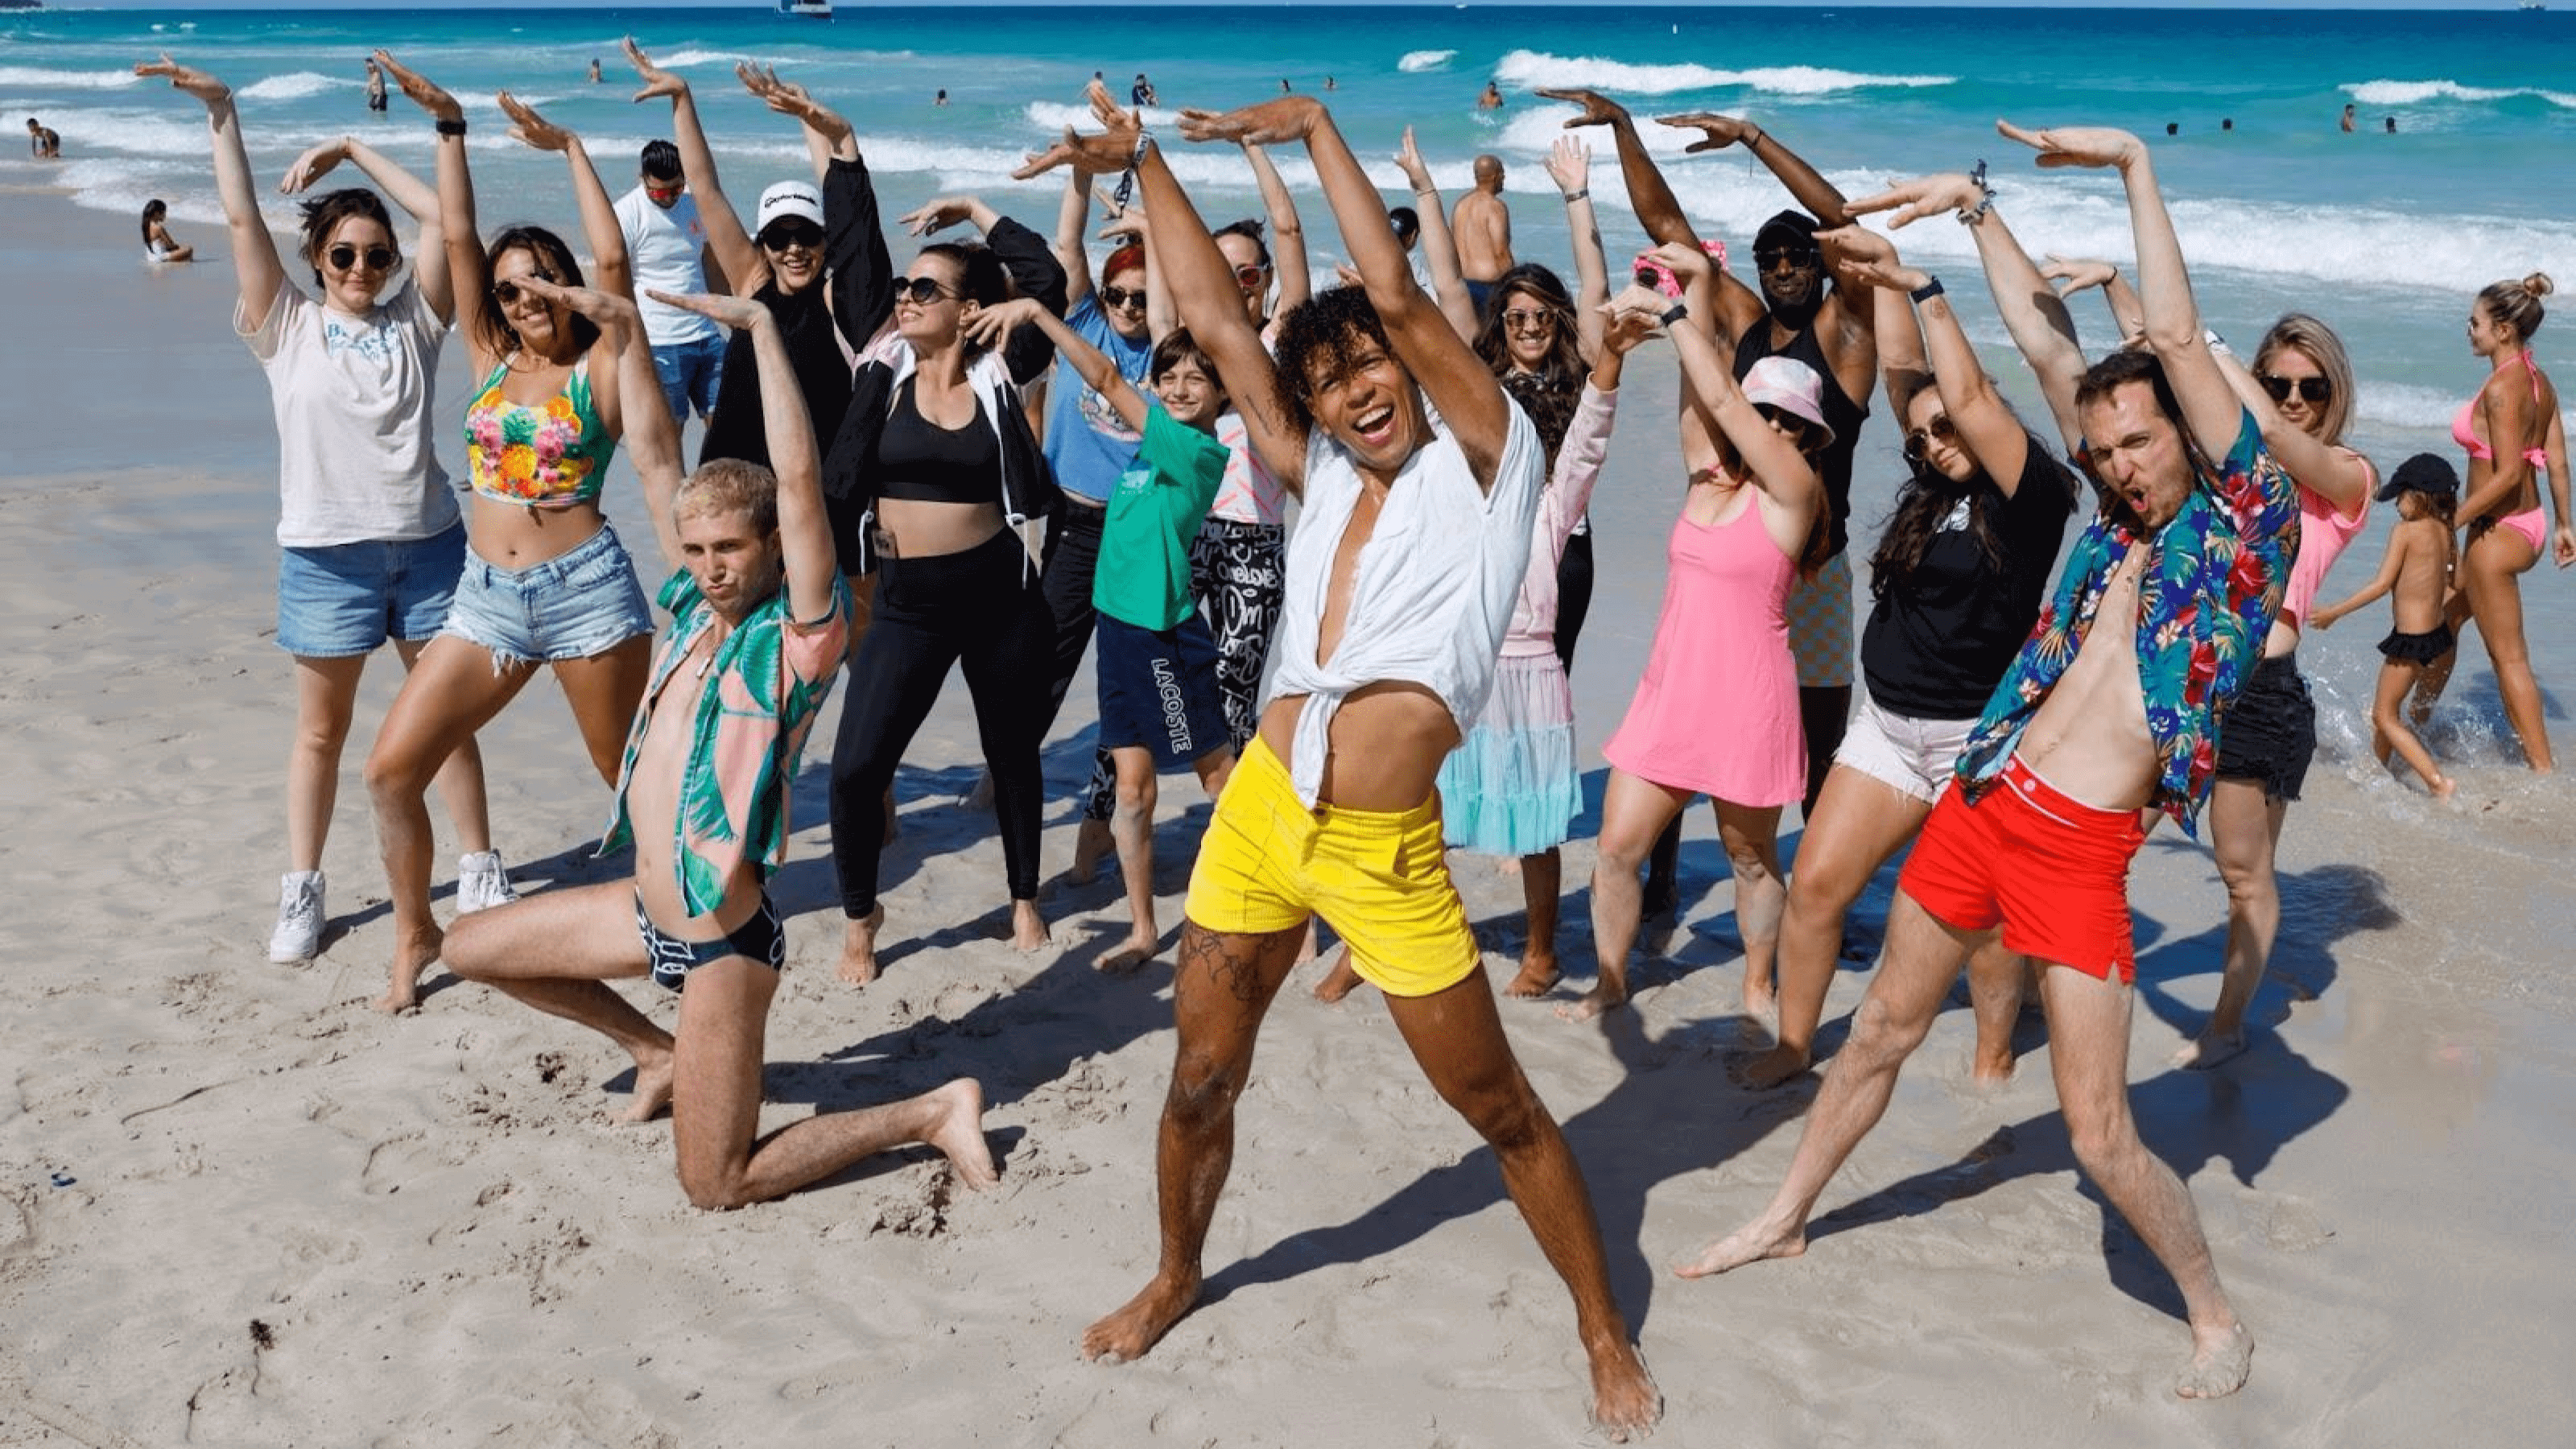 Experiential marketing flash mob at the beach